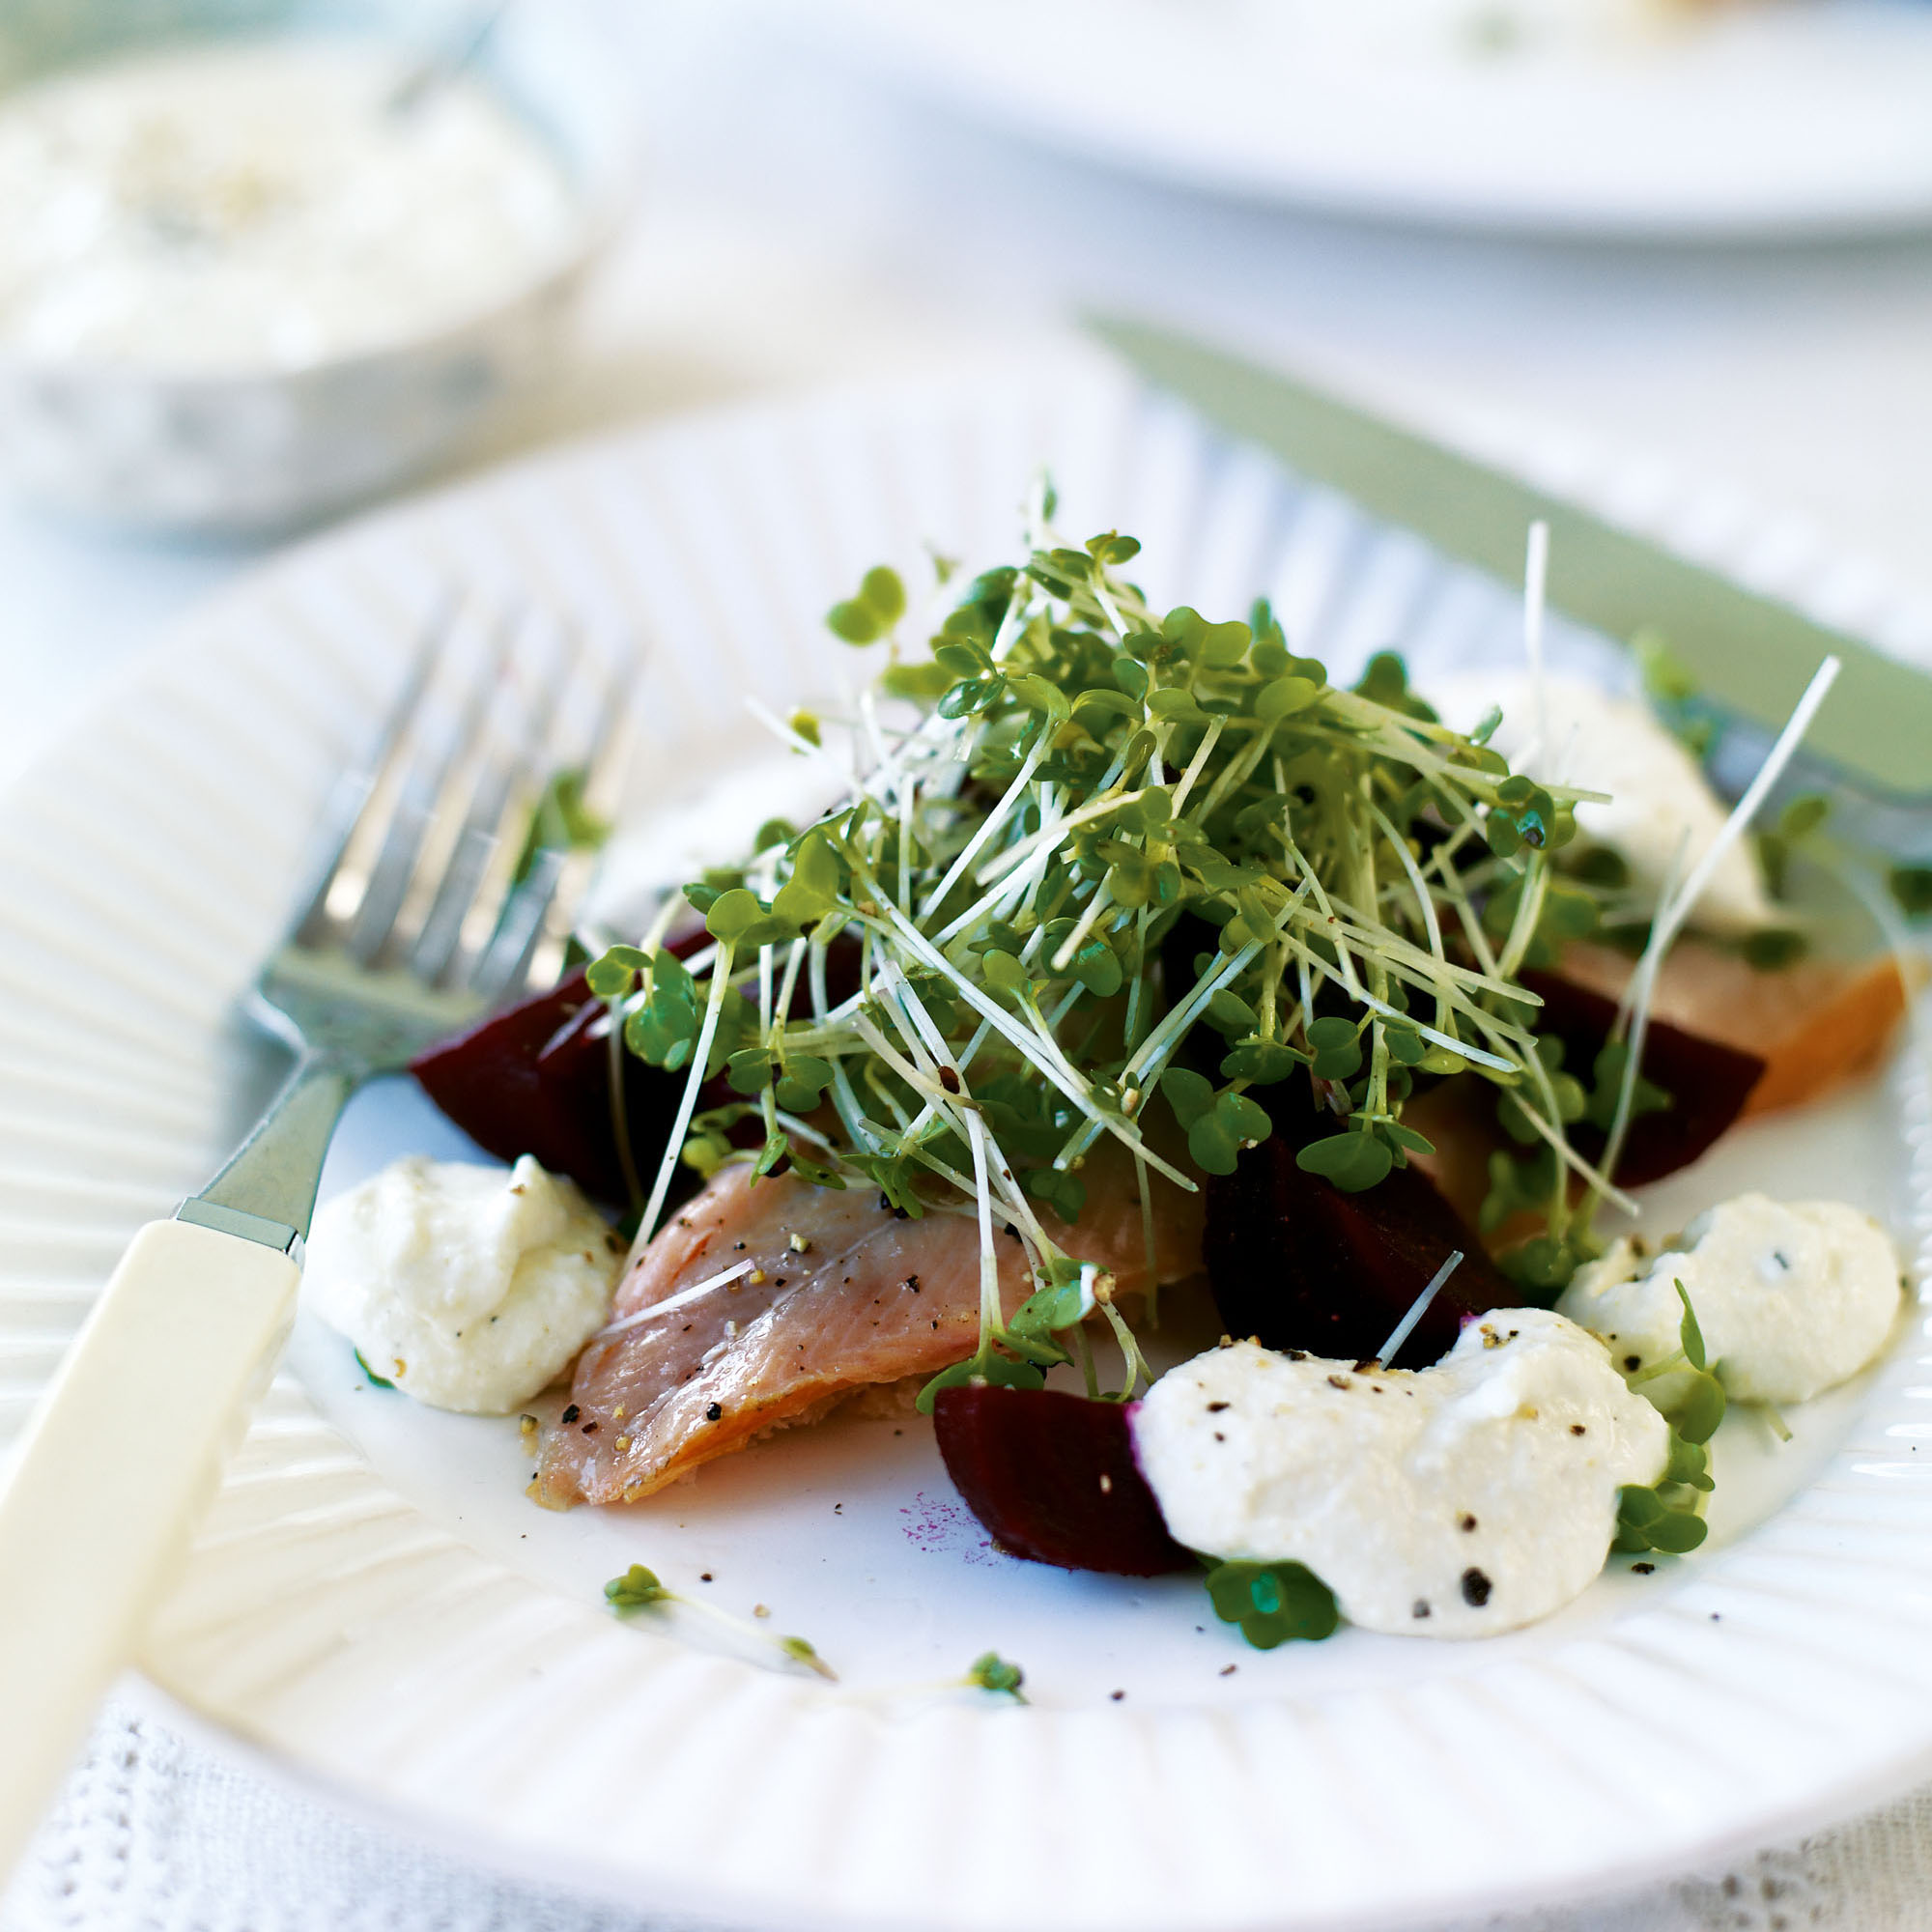 Smoked Trout With Horseradish, Beetroot And Cress Recipe